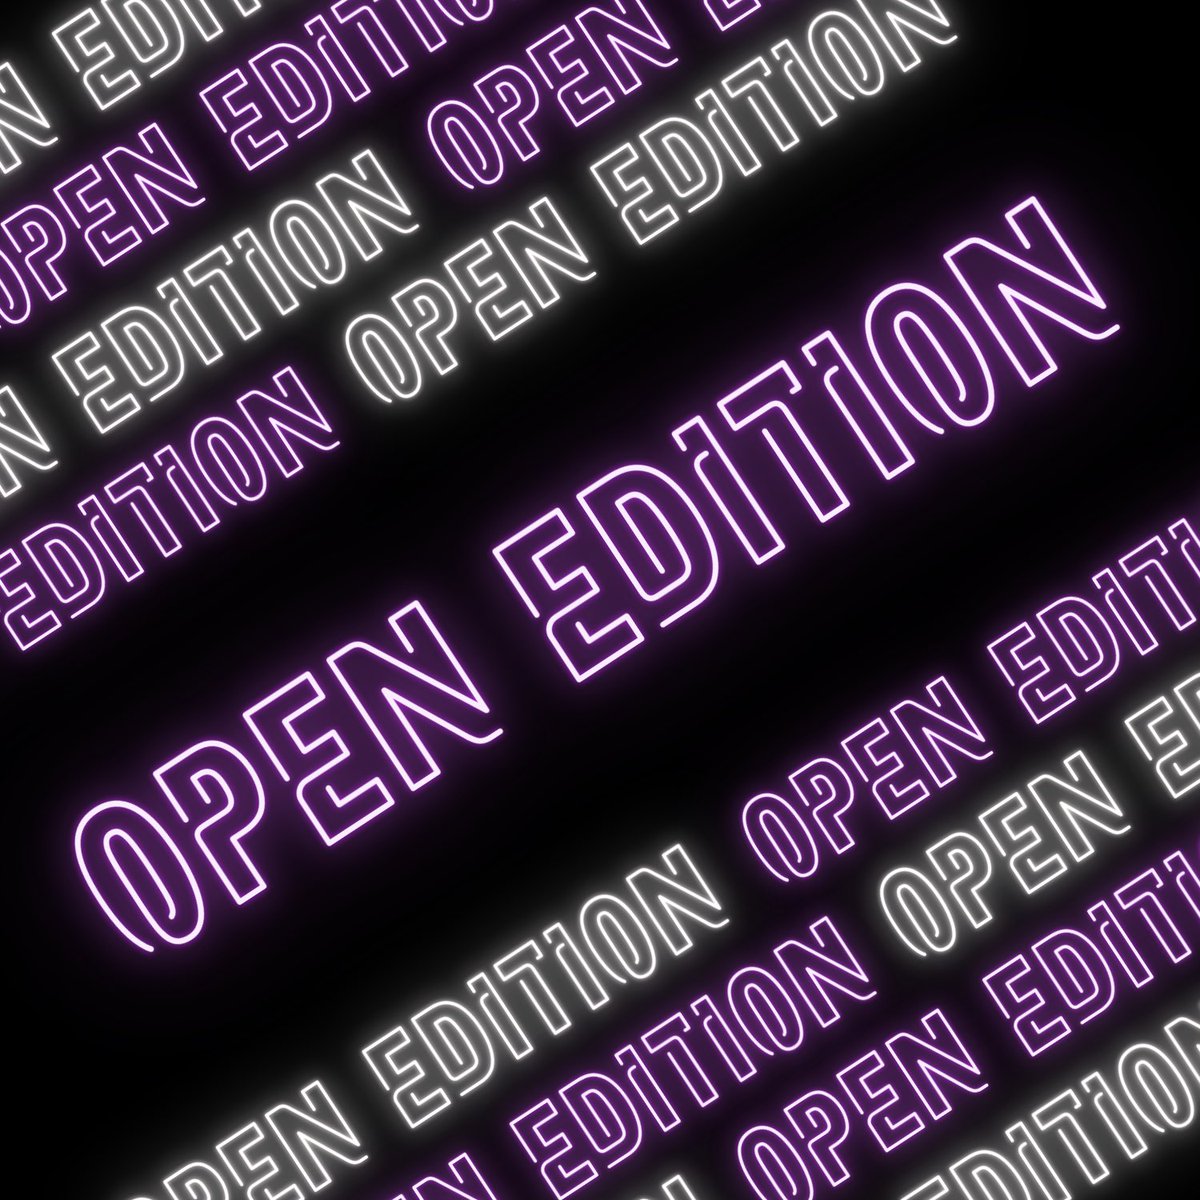 ~      I      ~
       💜
    OPEN
EDITIONS

• Drop your LIVE OE 👇
• #artforeveryone ALL comments
• Tag a friend w/ an OE 👇
• Tag me in all OE ‼️
• Spread the word 🎤
• BM for future Open Editions ☑️

LIKE 💜 FOLLOW 💜 SHARE 💜
#OpenEdition #NFT